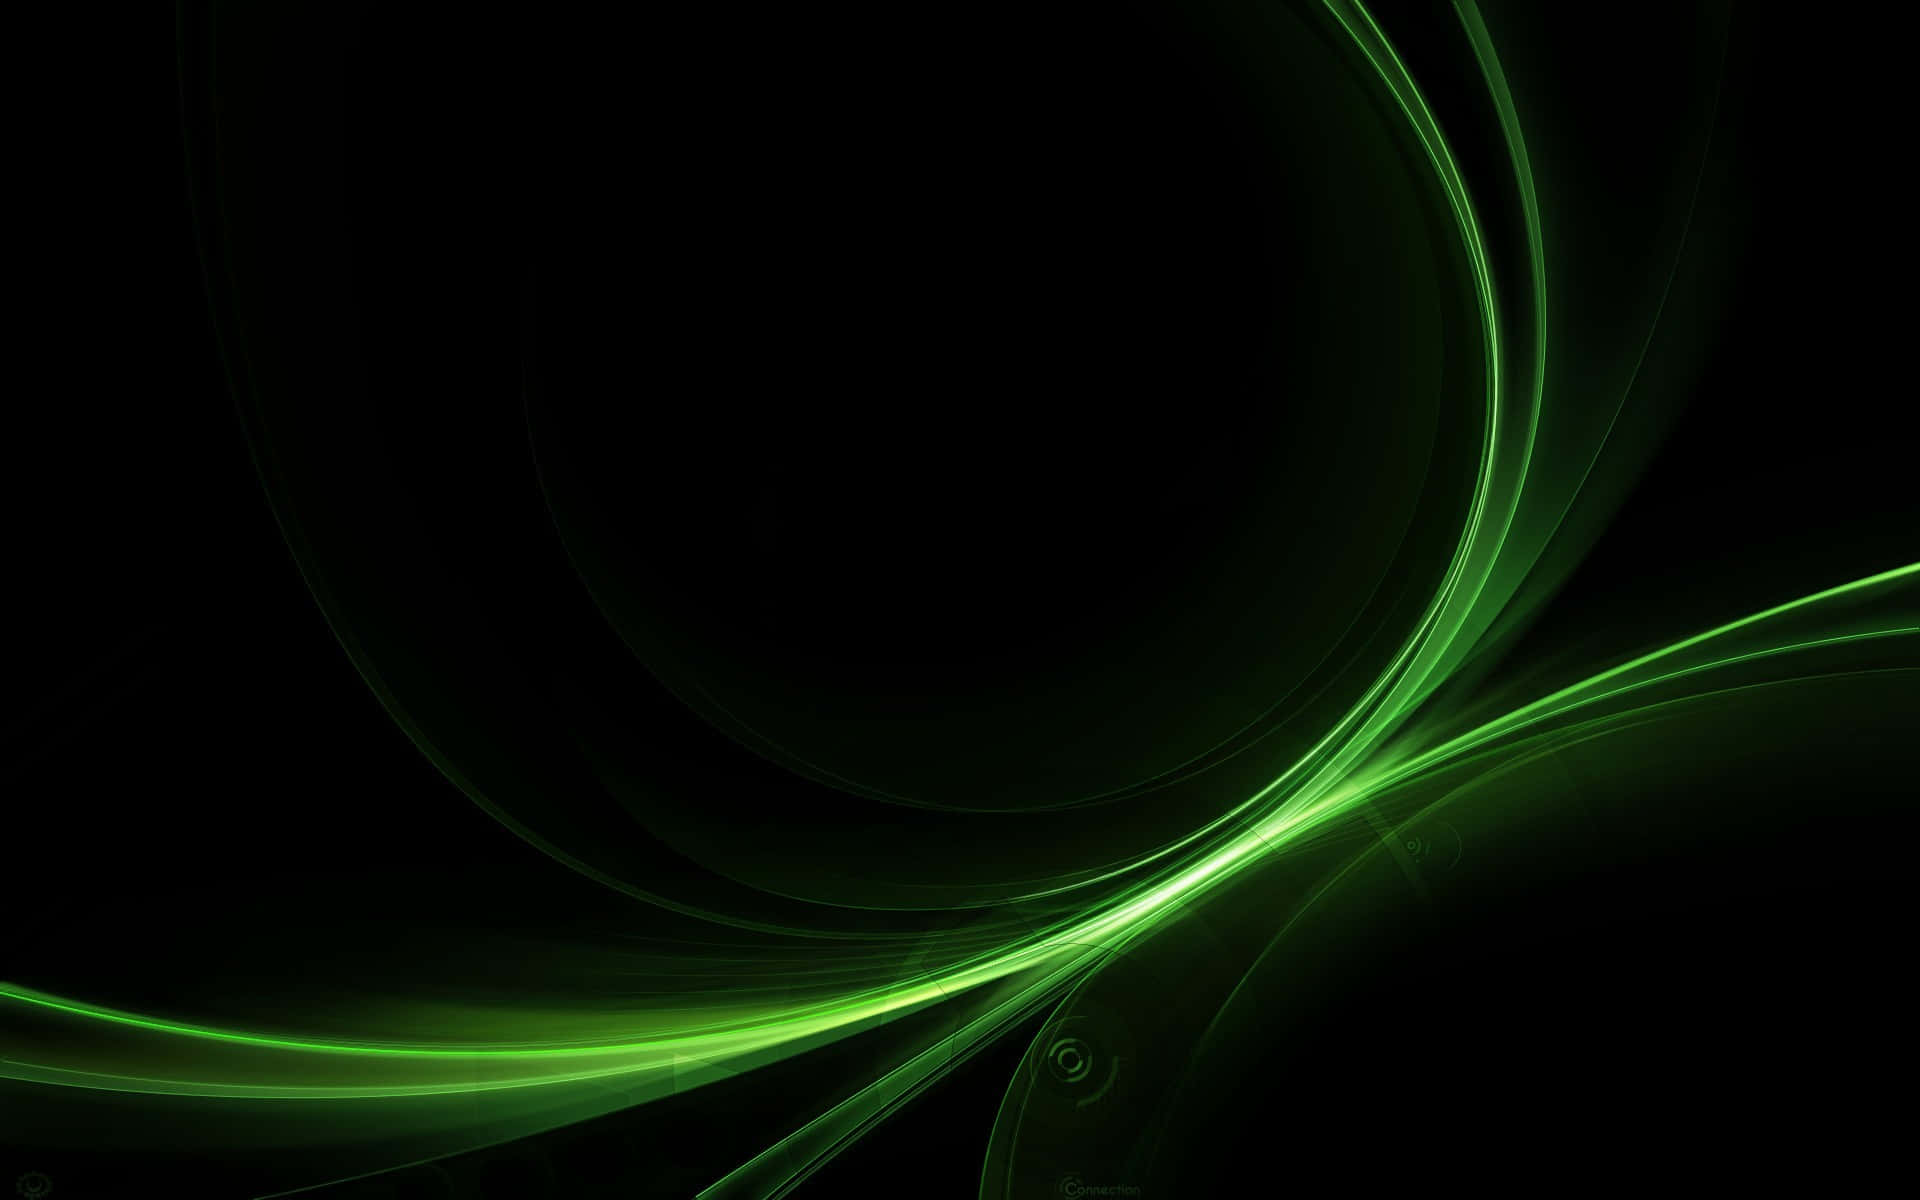 Feel the power of a green phone Wallpaper